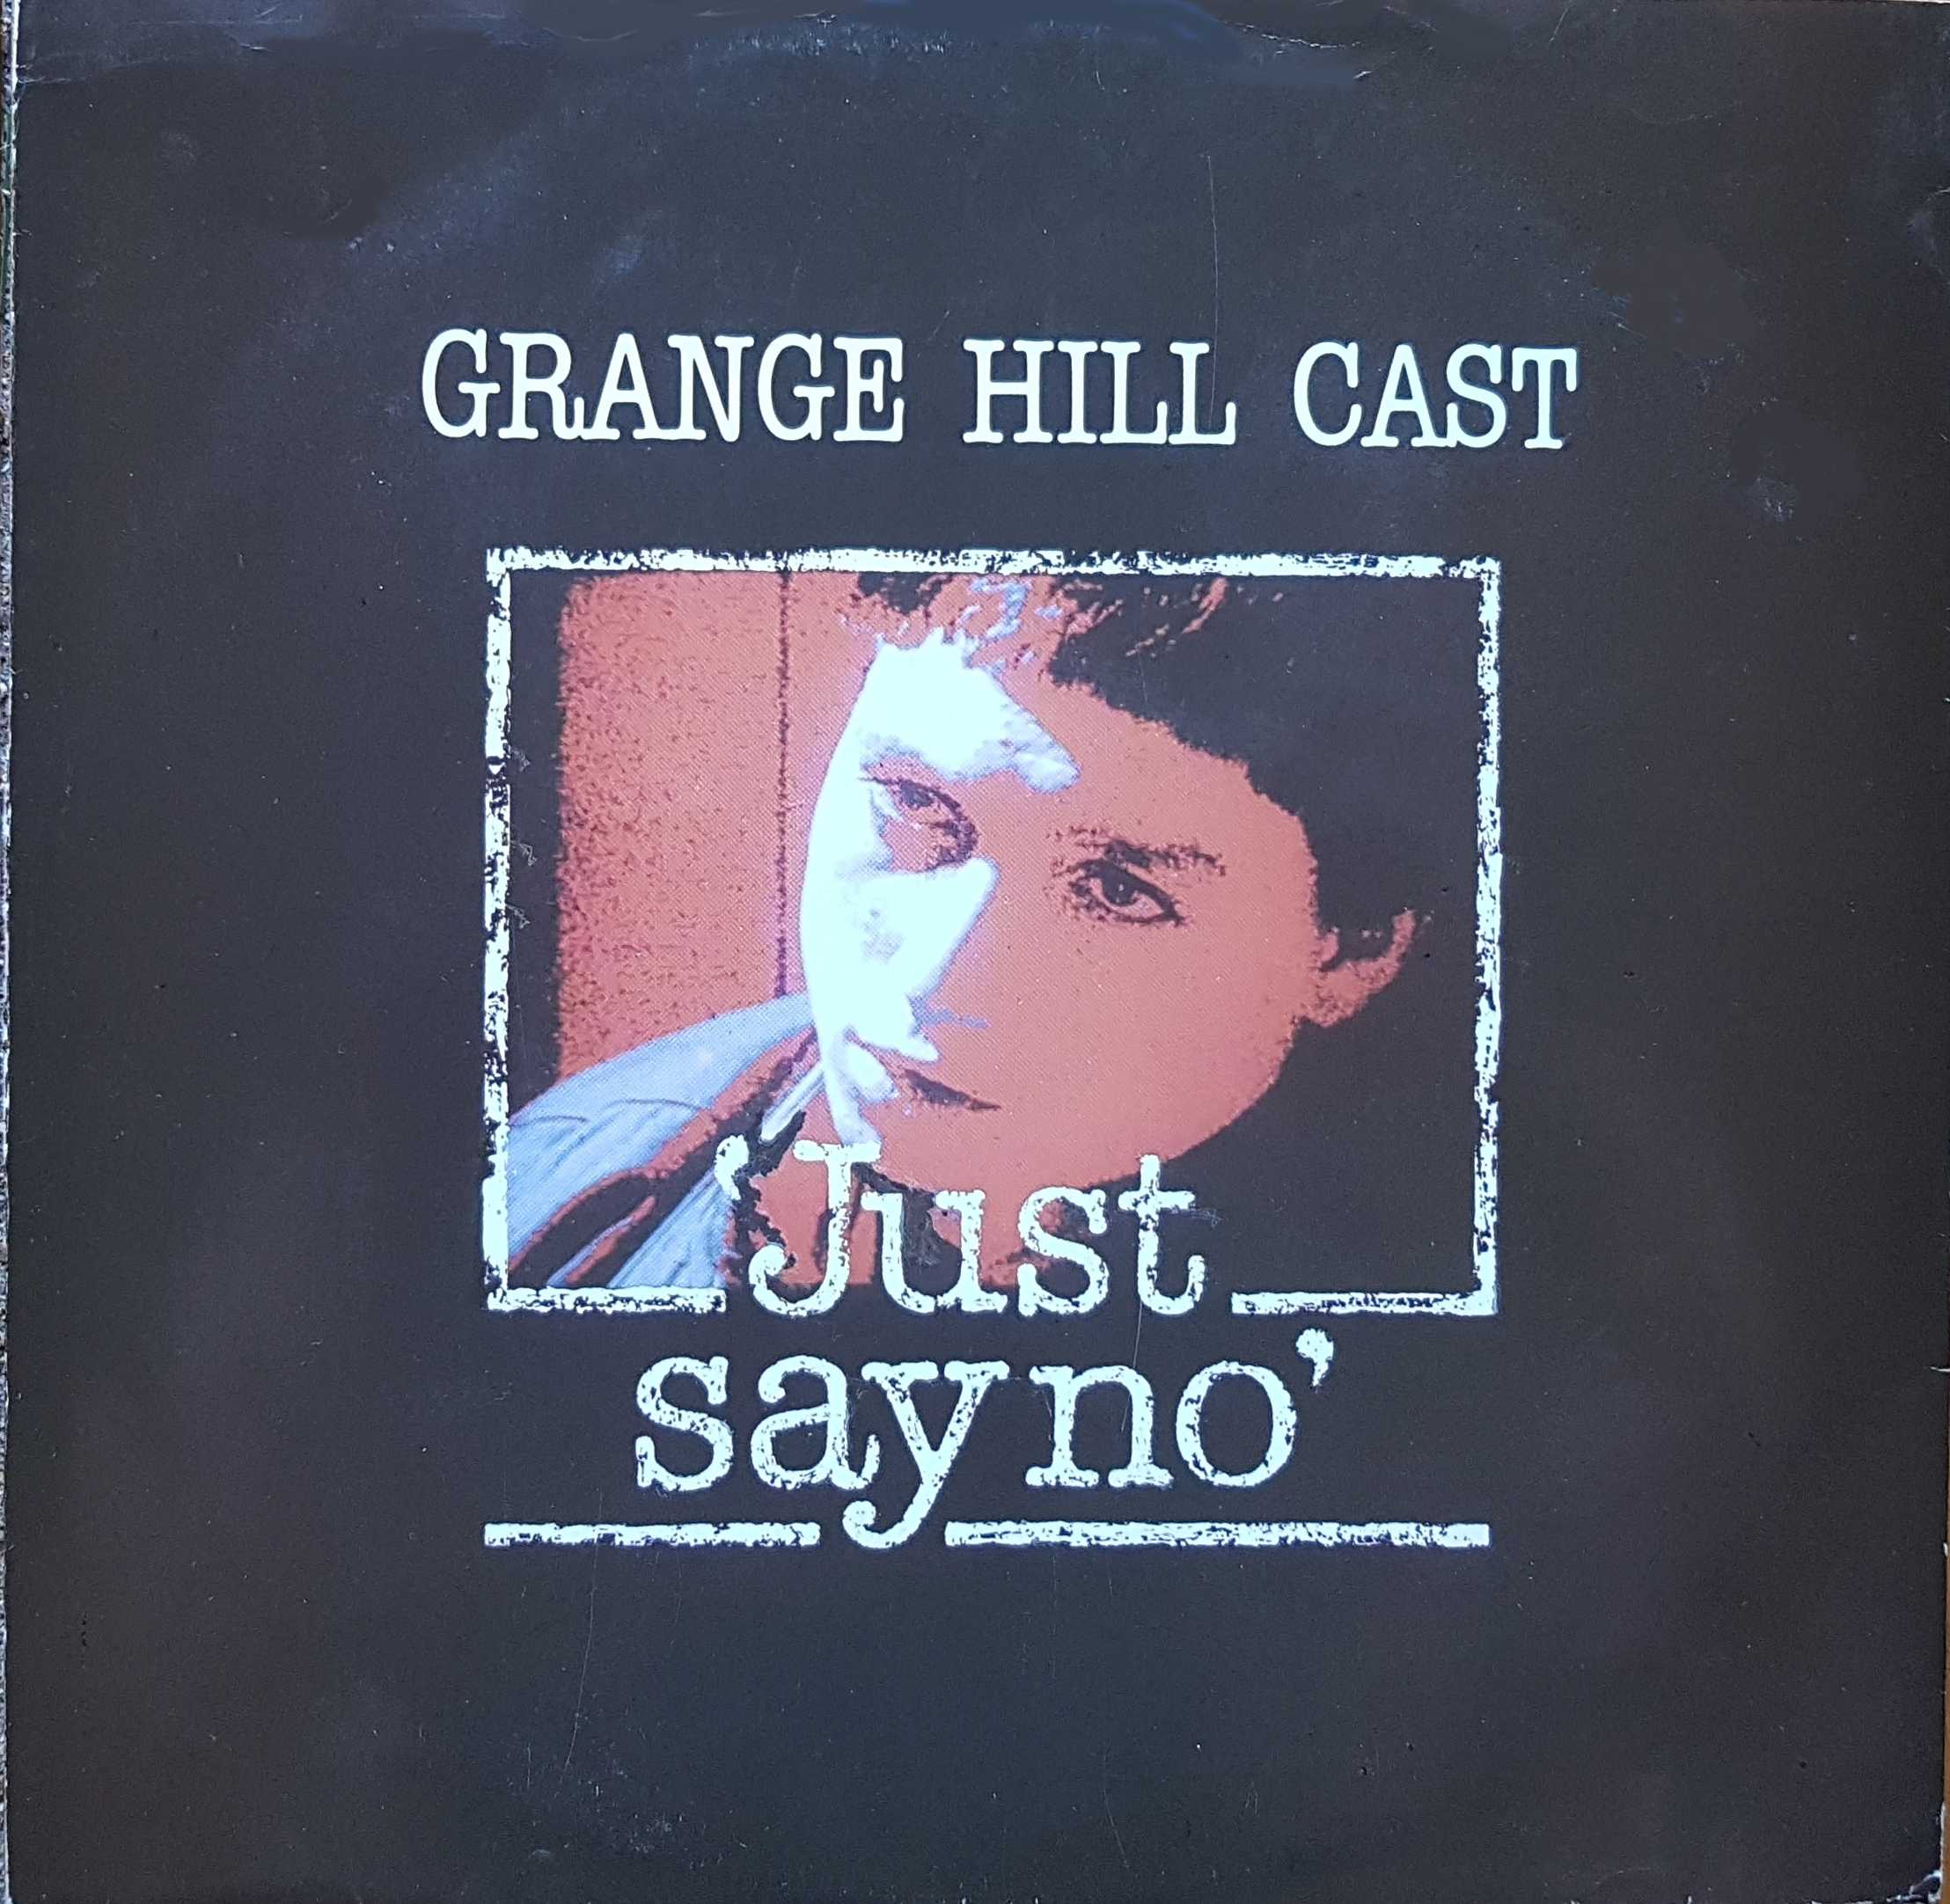 Picture of 12 RSL 183 Just say no (Grange Hill) by artist Grogani / McMahon / Grange Hill cast from the BBC 12inches - Records and Tapes library